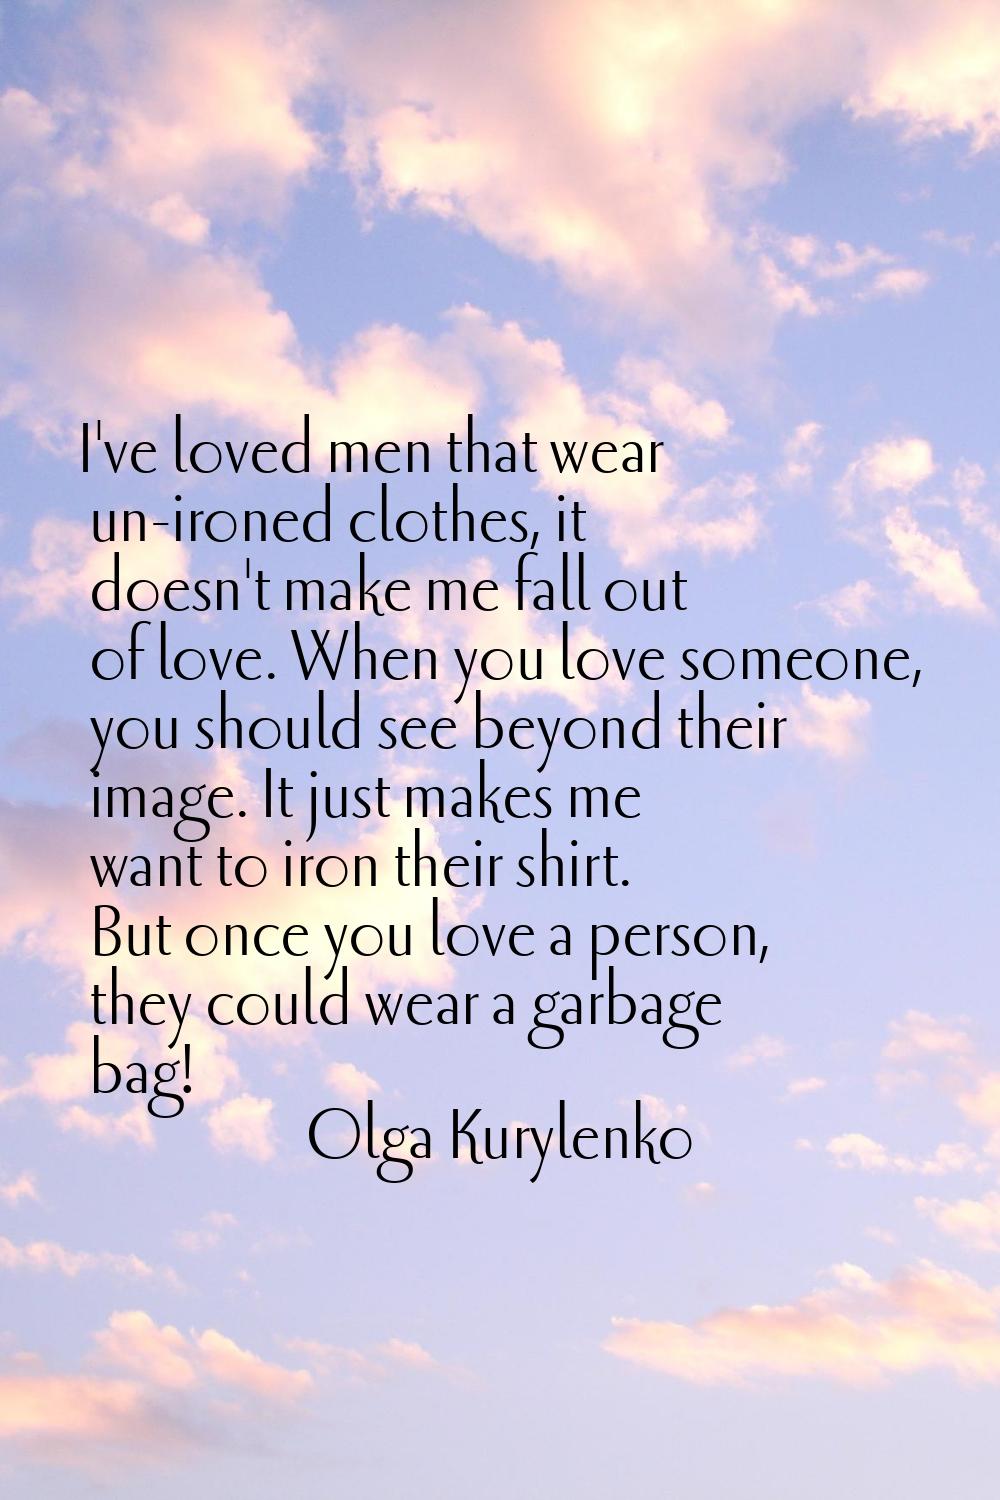 I've loved men that wear un-ironed clothes, it doesn't make me fall out of love. When you love some